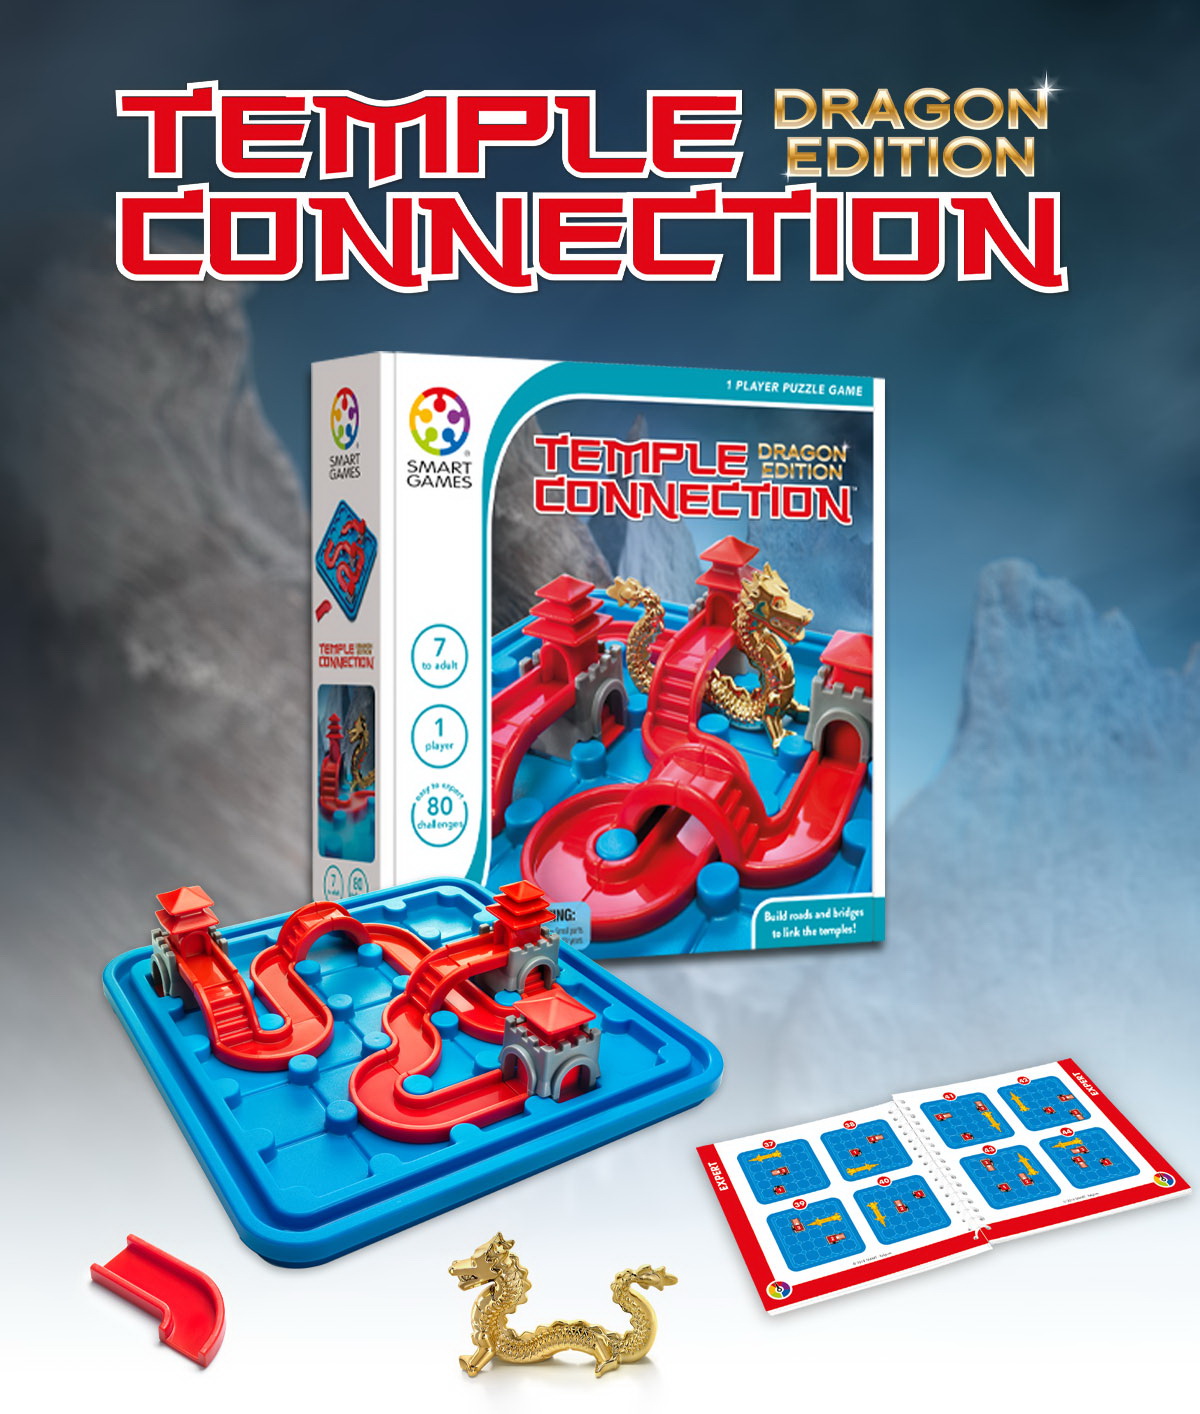 Smart Games SG283 - Temple Connection Dragon Edition